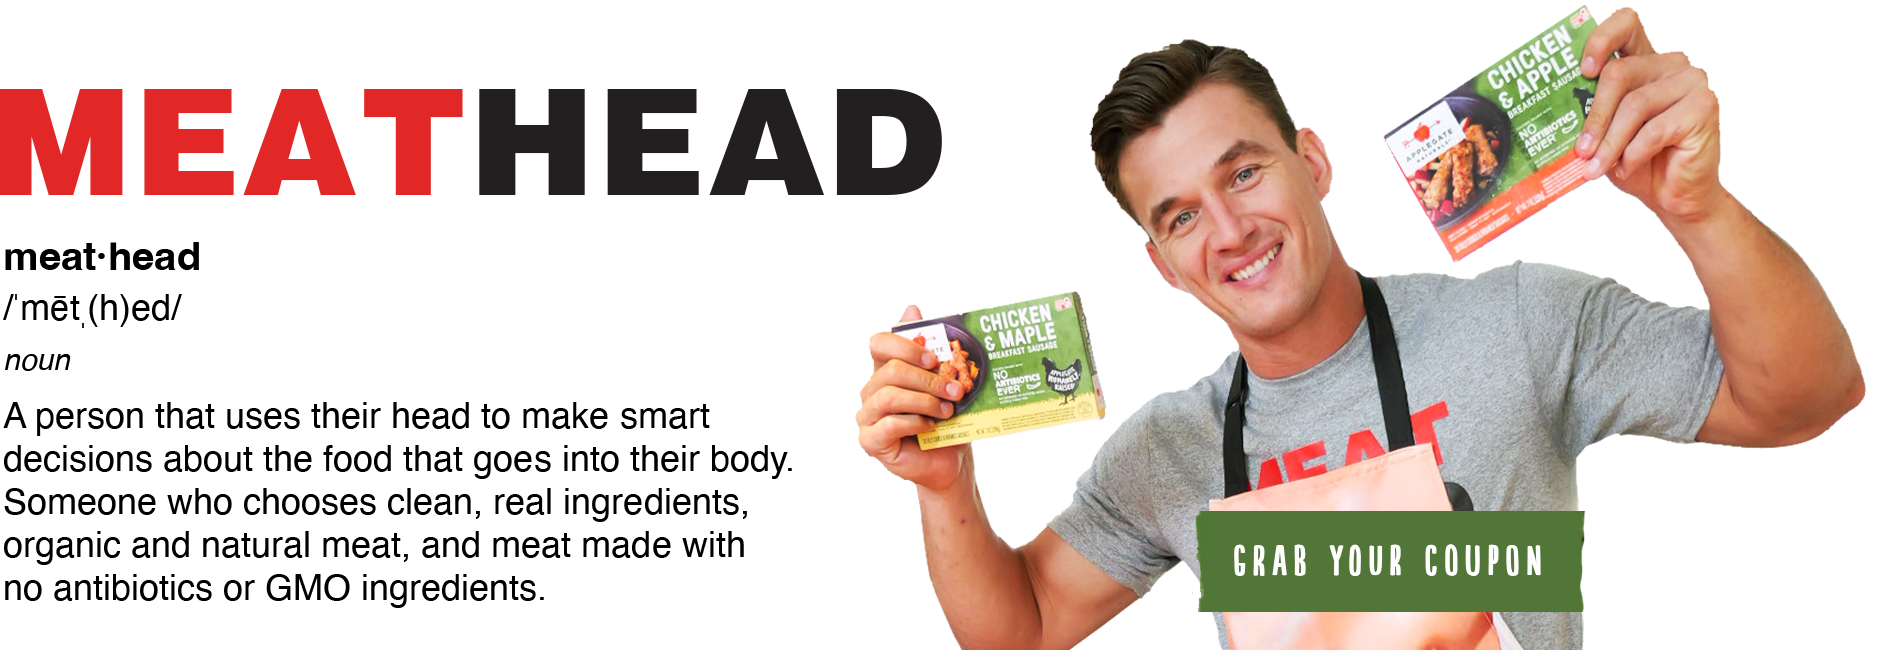 Meathead: A person that uses their head to make smart decisions about the food that goes into their body. Someone who chooses clean, real ingredients, organic and natural meat, and meat made with no antibiotics or GMO ingredients.